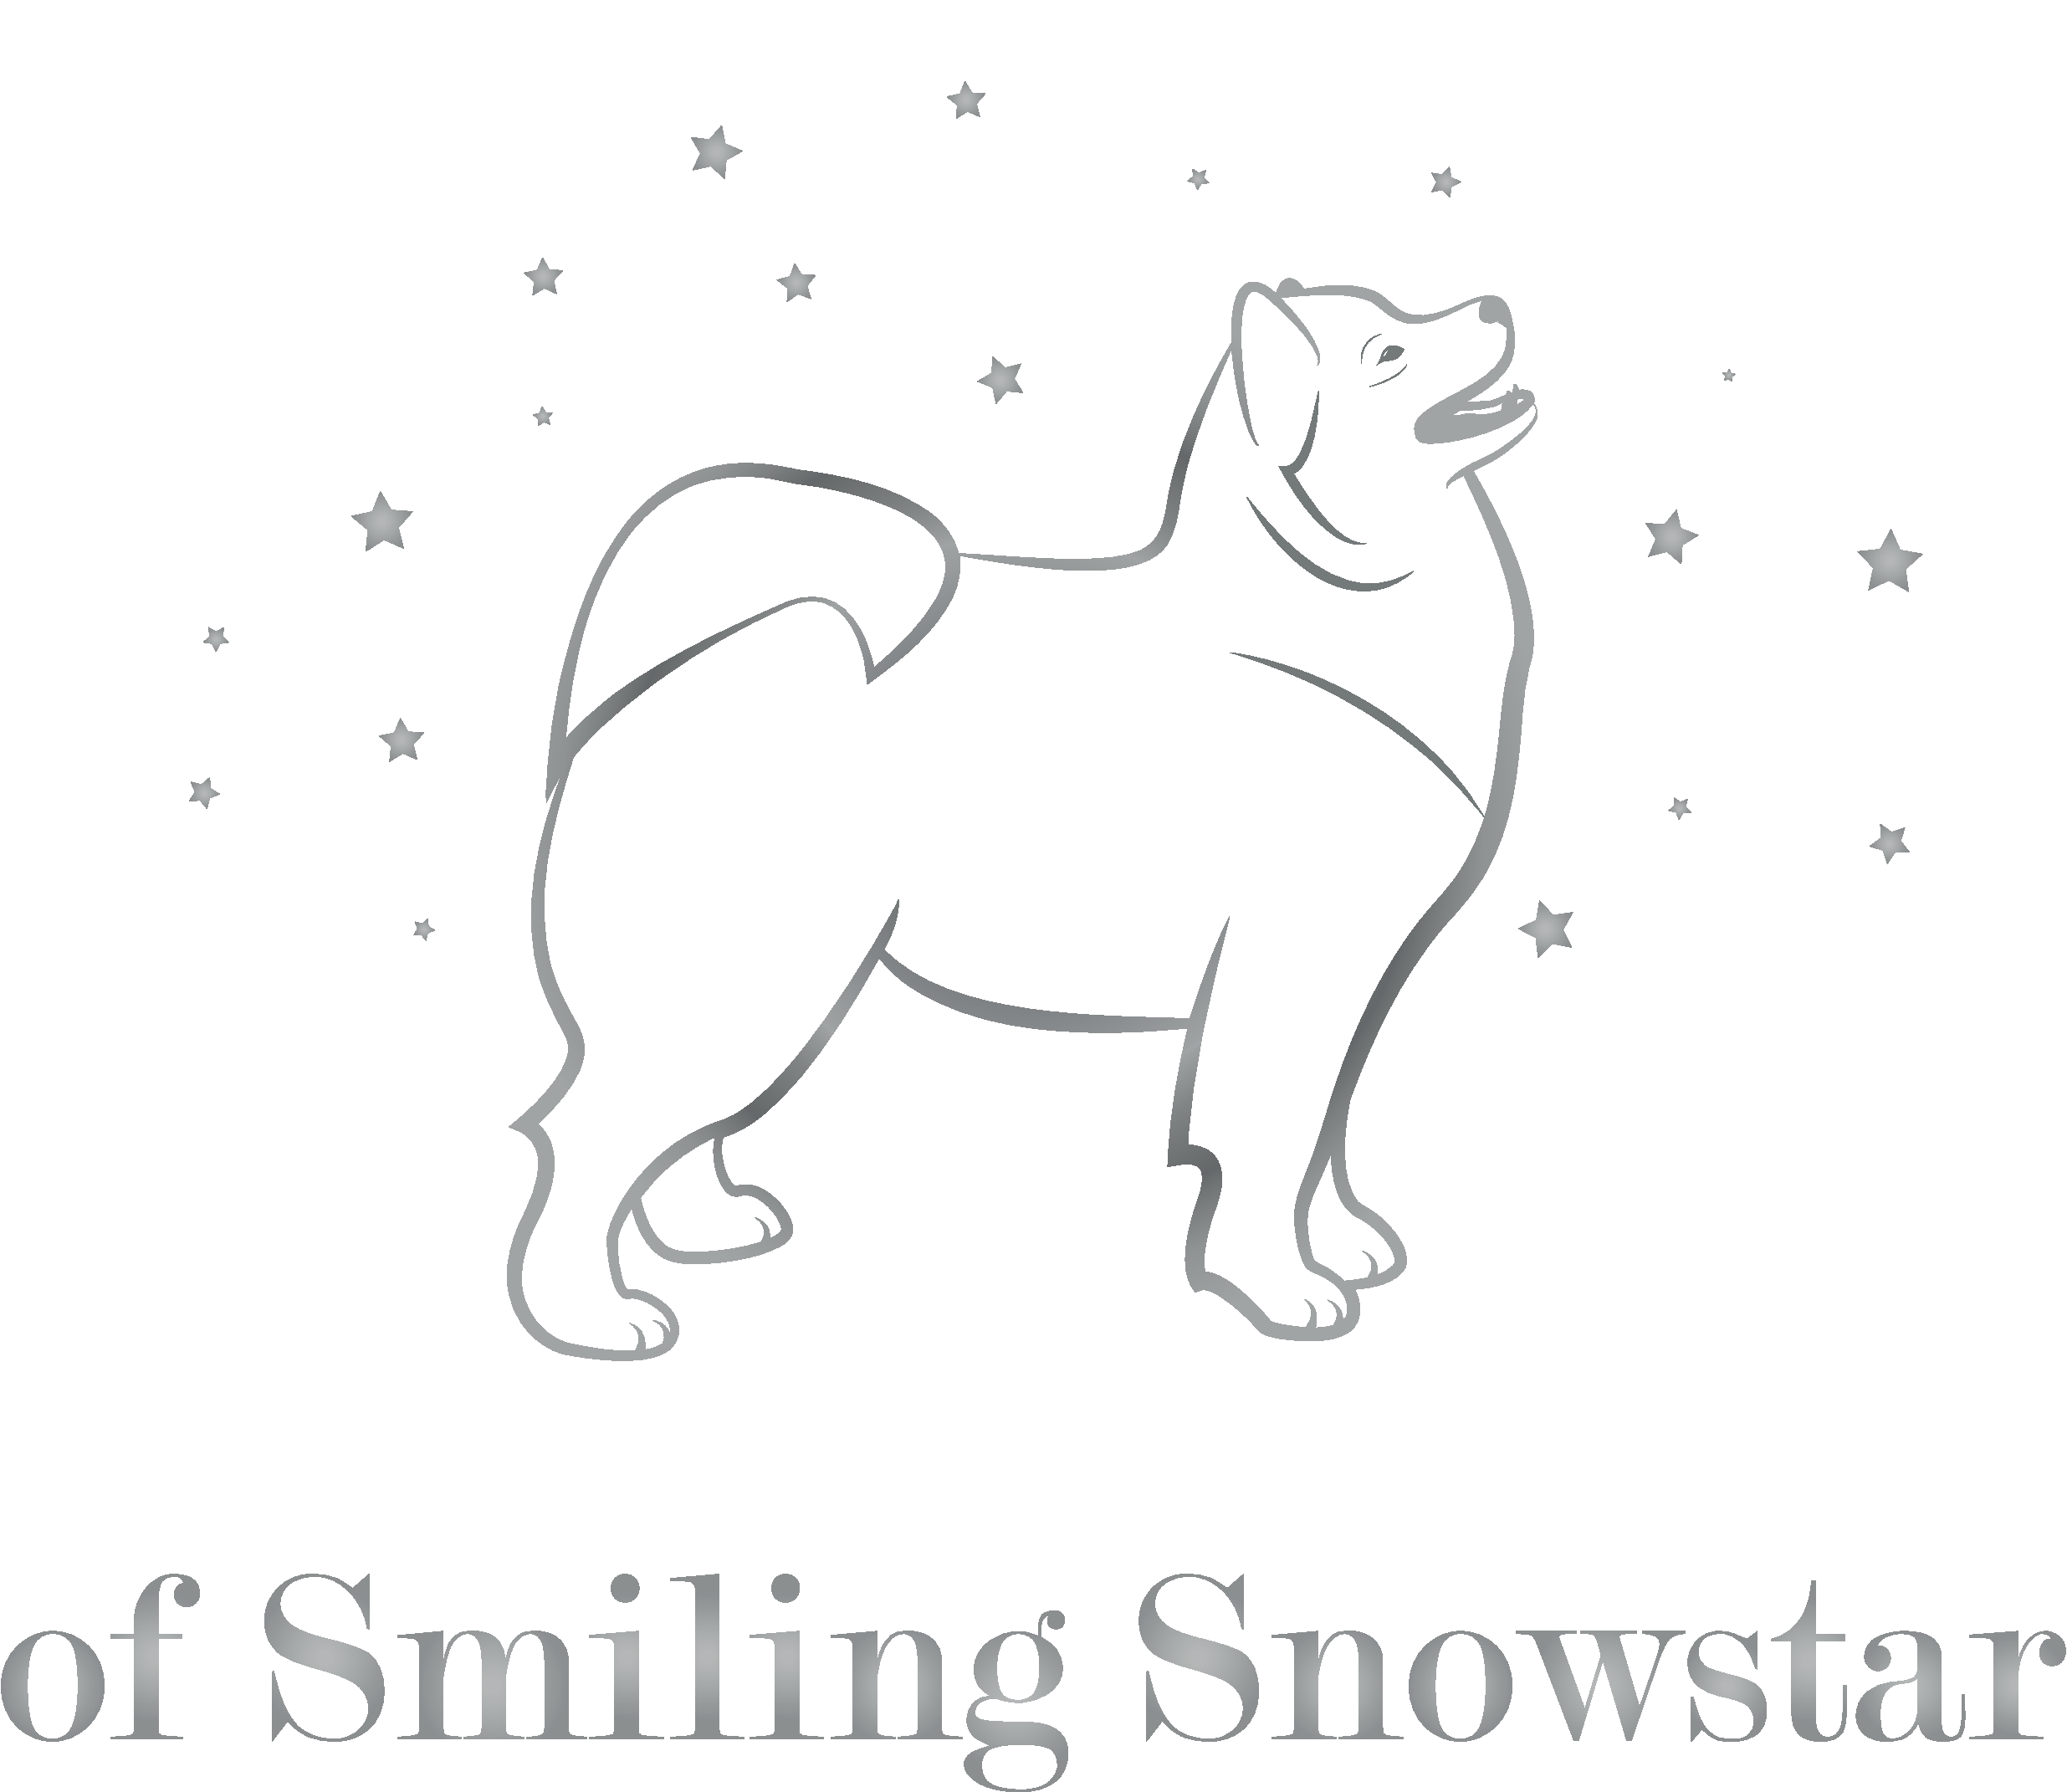 of smiling snowstarr